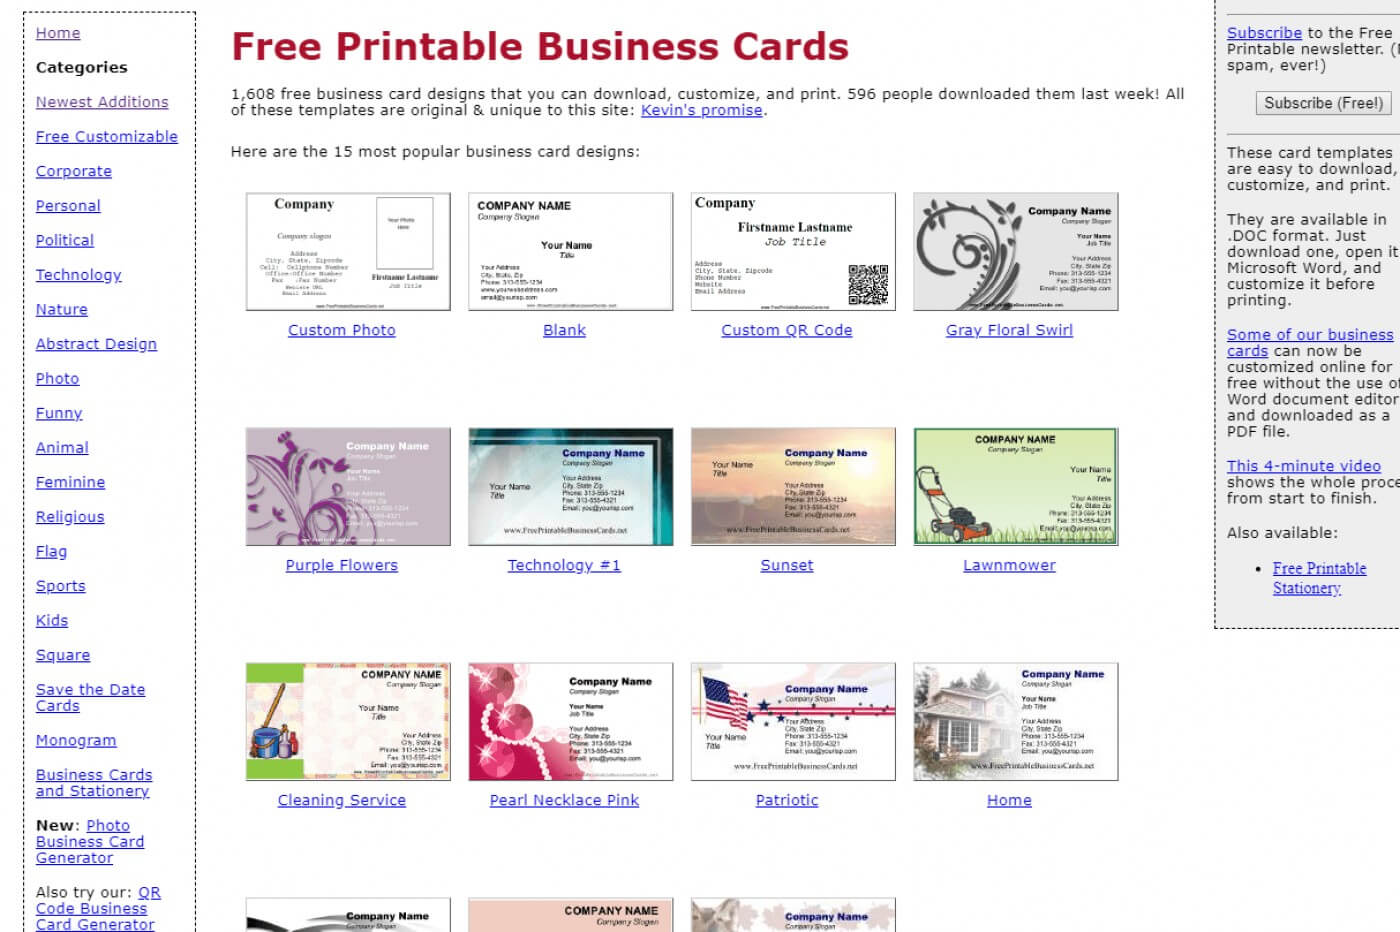 026 Free Printable Business Cards Blank Card Template For Word 2013 Business Card Template